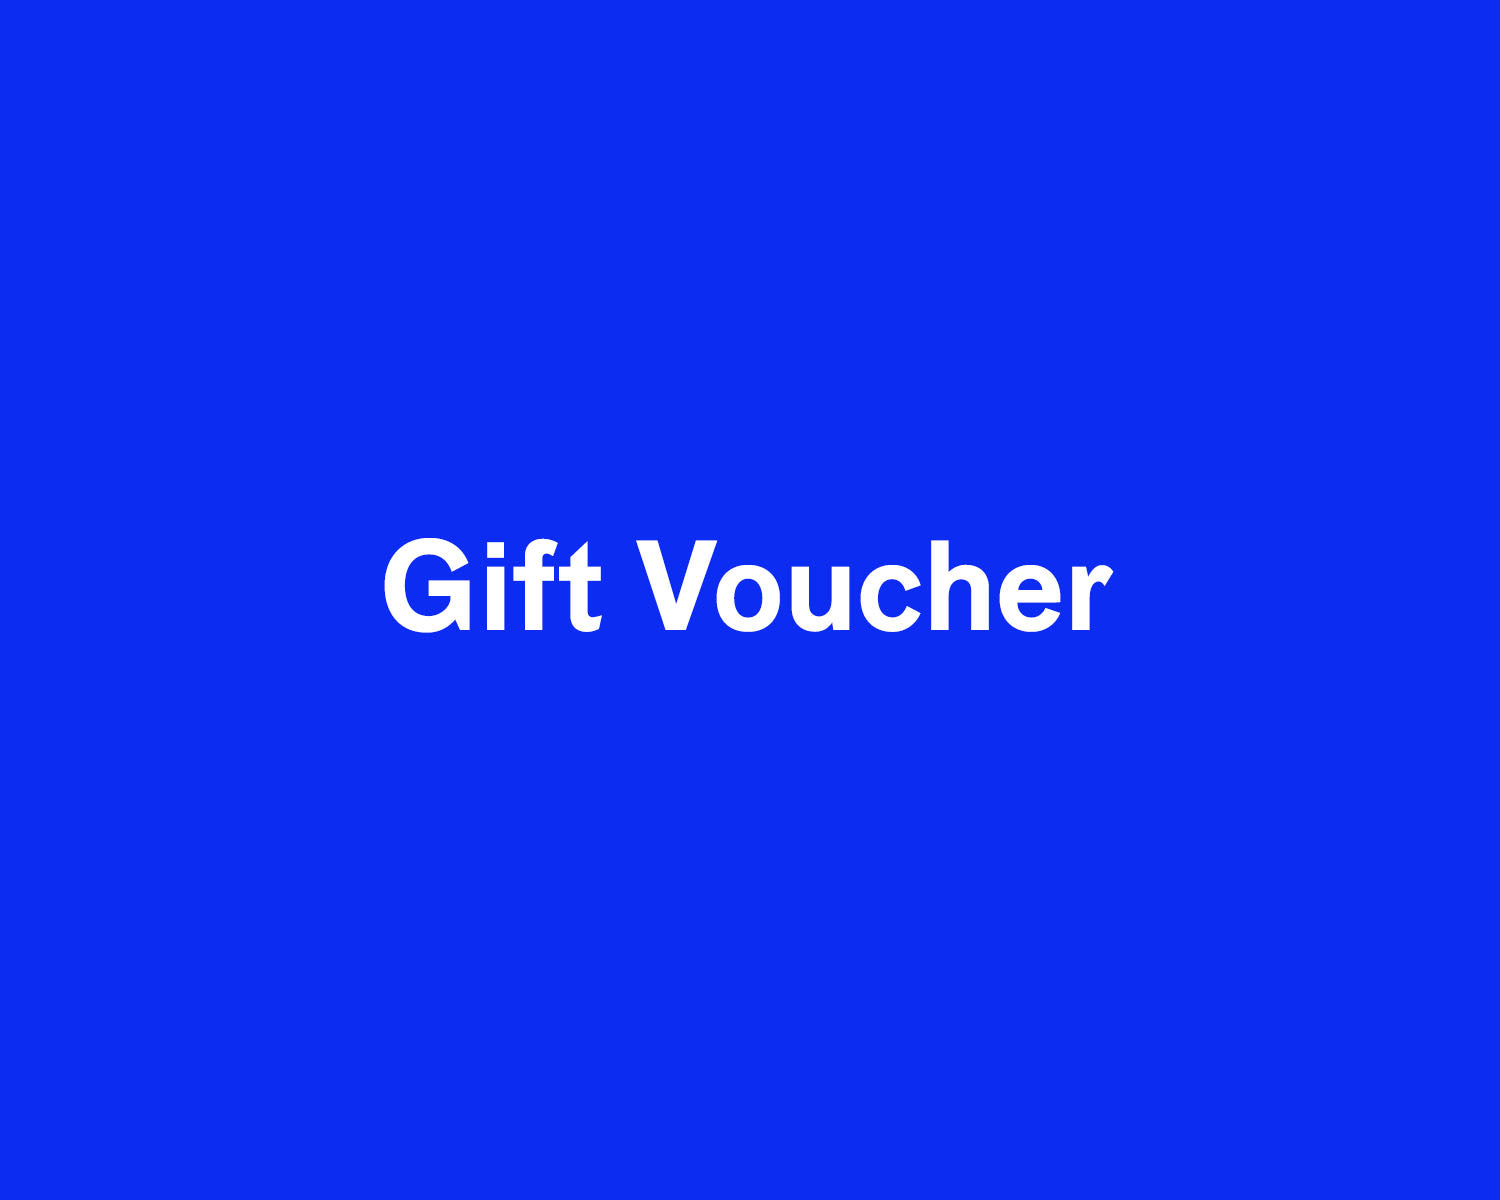 Things You Can Buy Gift Voucher